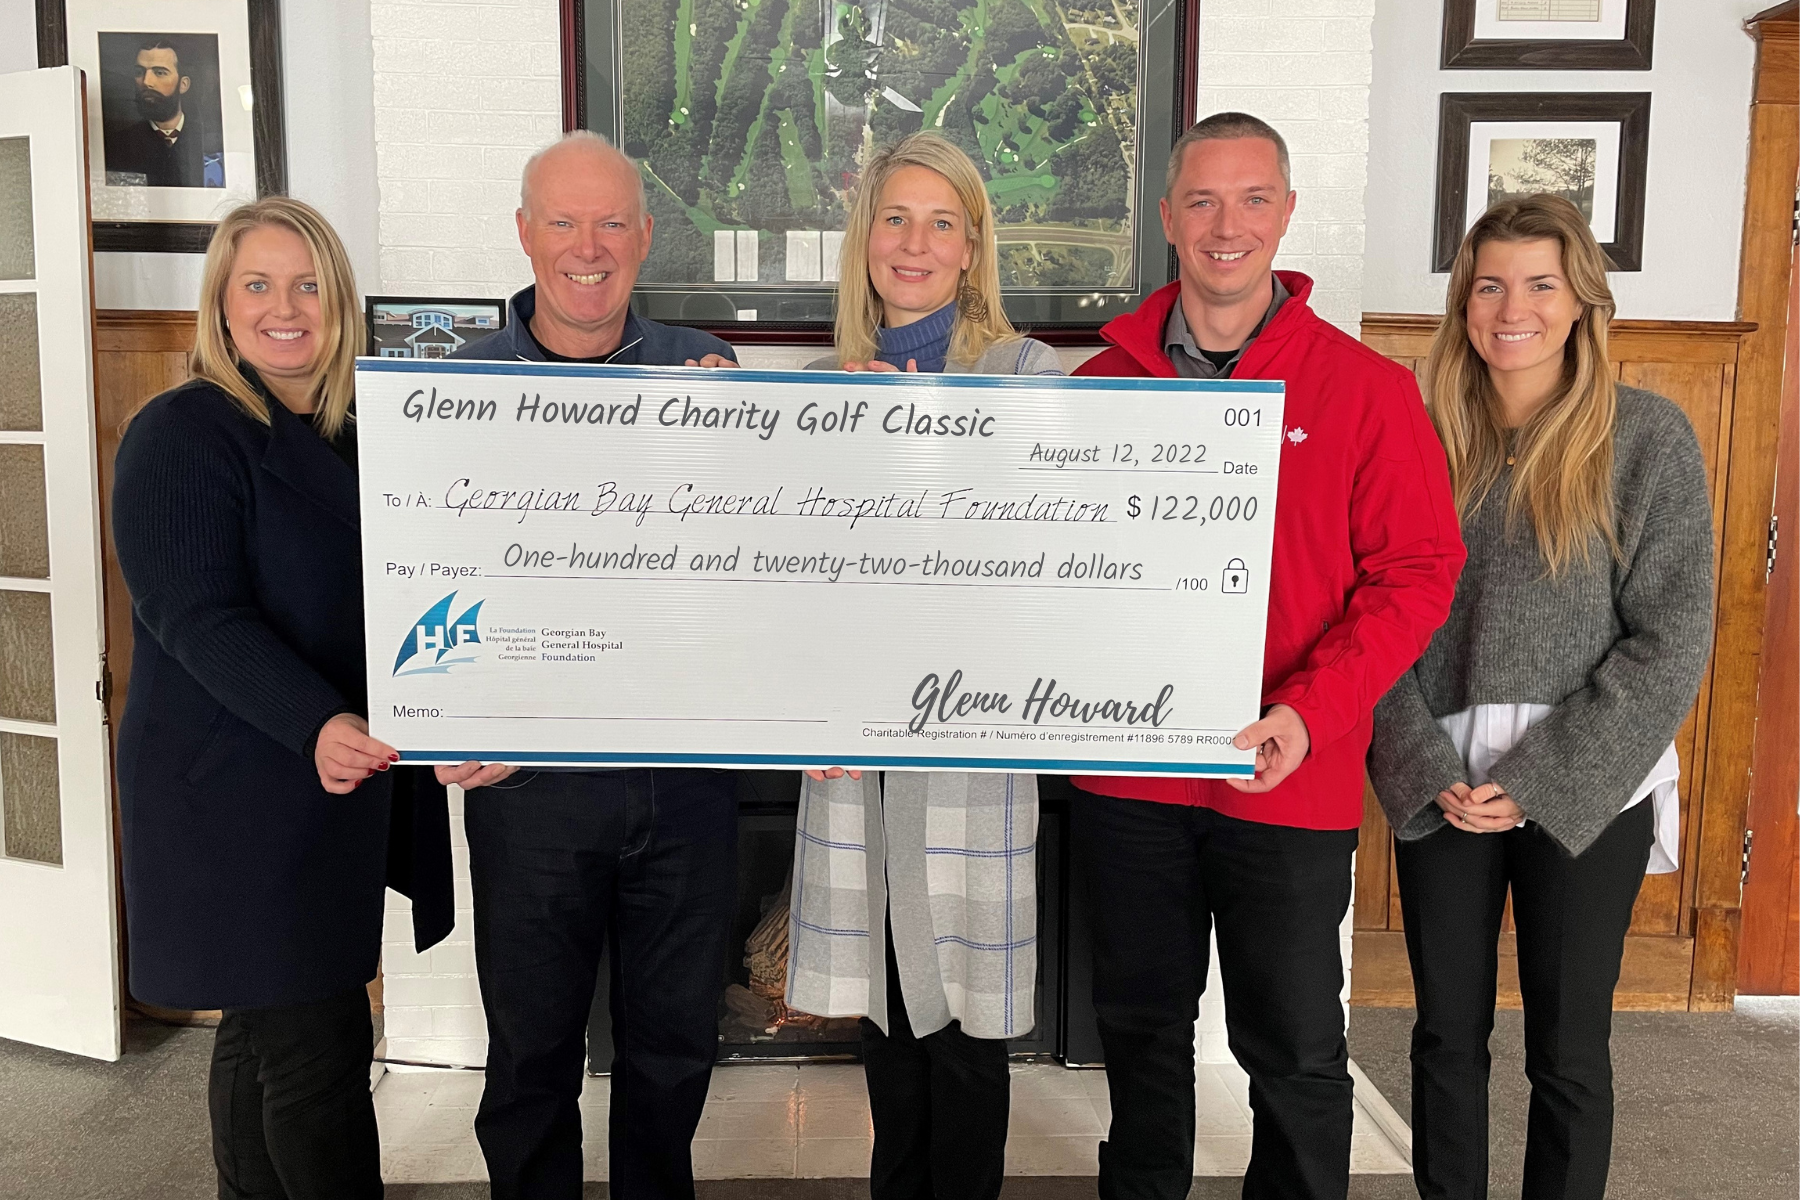 Two men and three women stand with a giant cheque for $122,000 for the GBGH Foundation from the Glenn Howard Charity Golf Classic